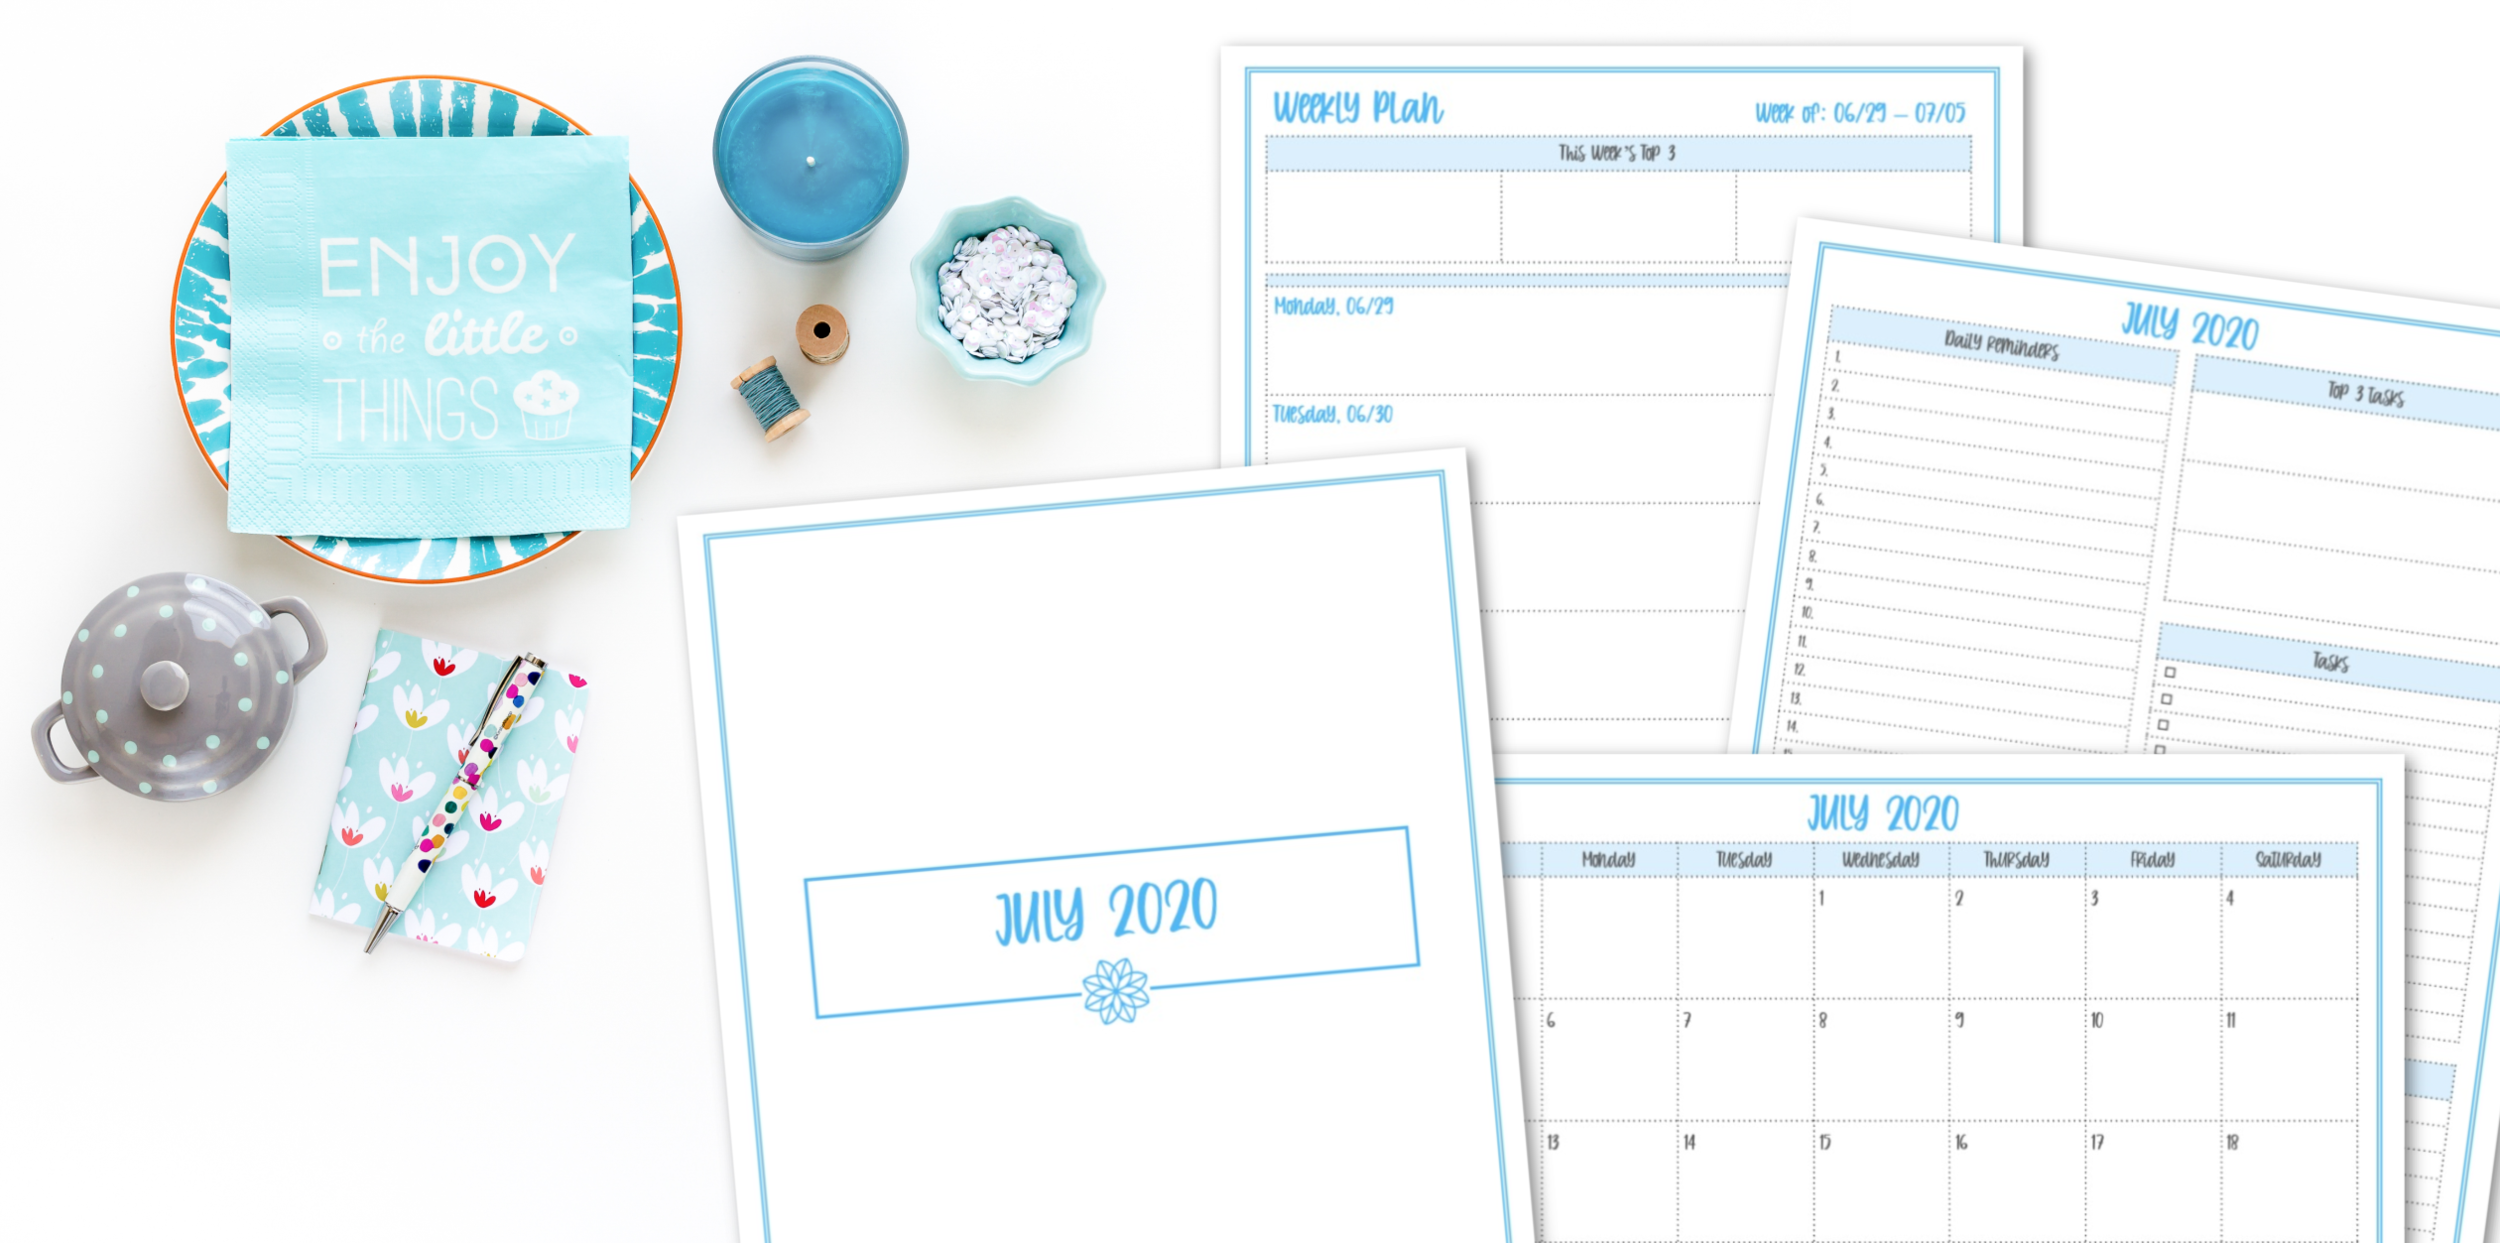 Join the Krafty Planner Society - July 2020